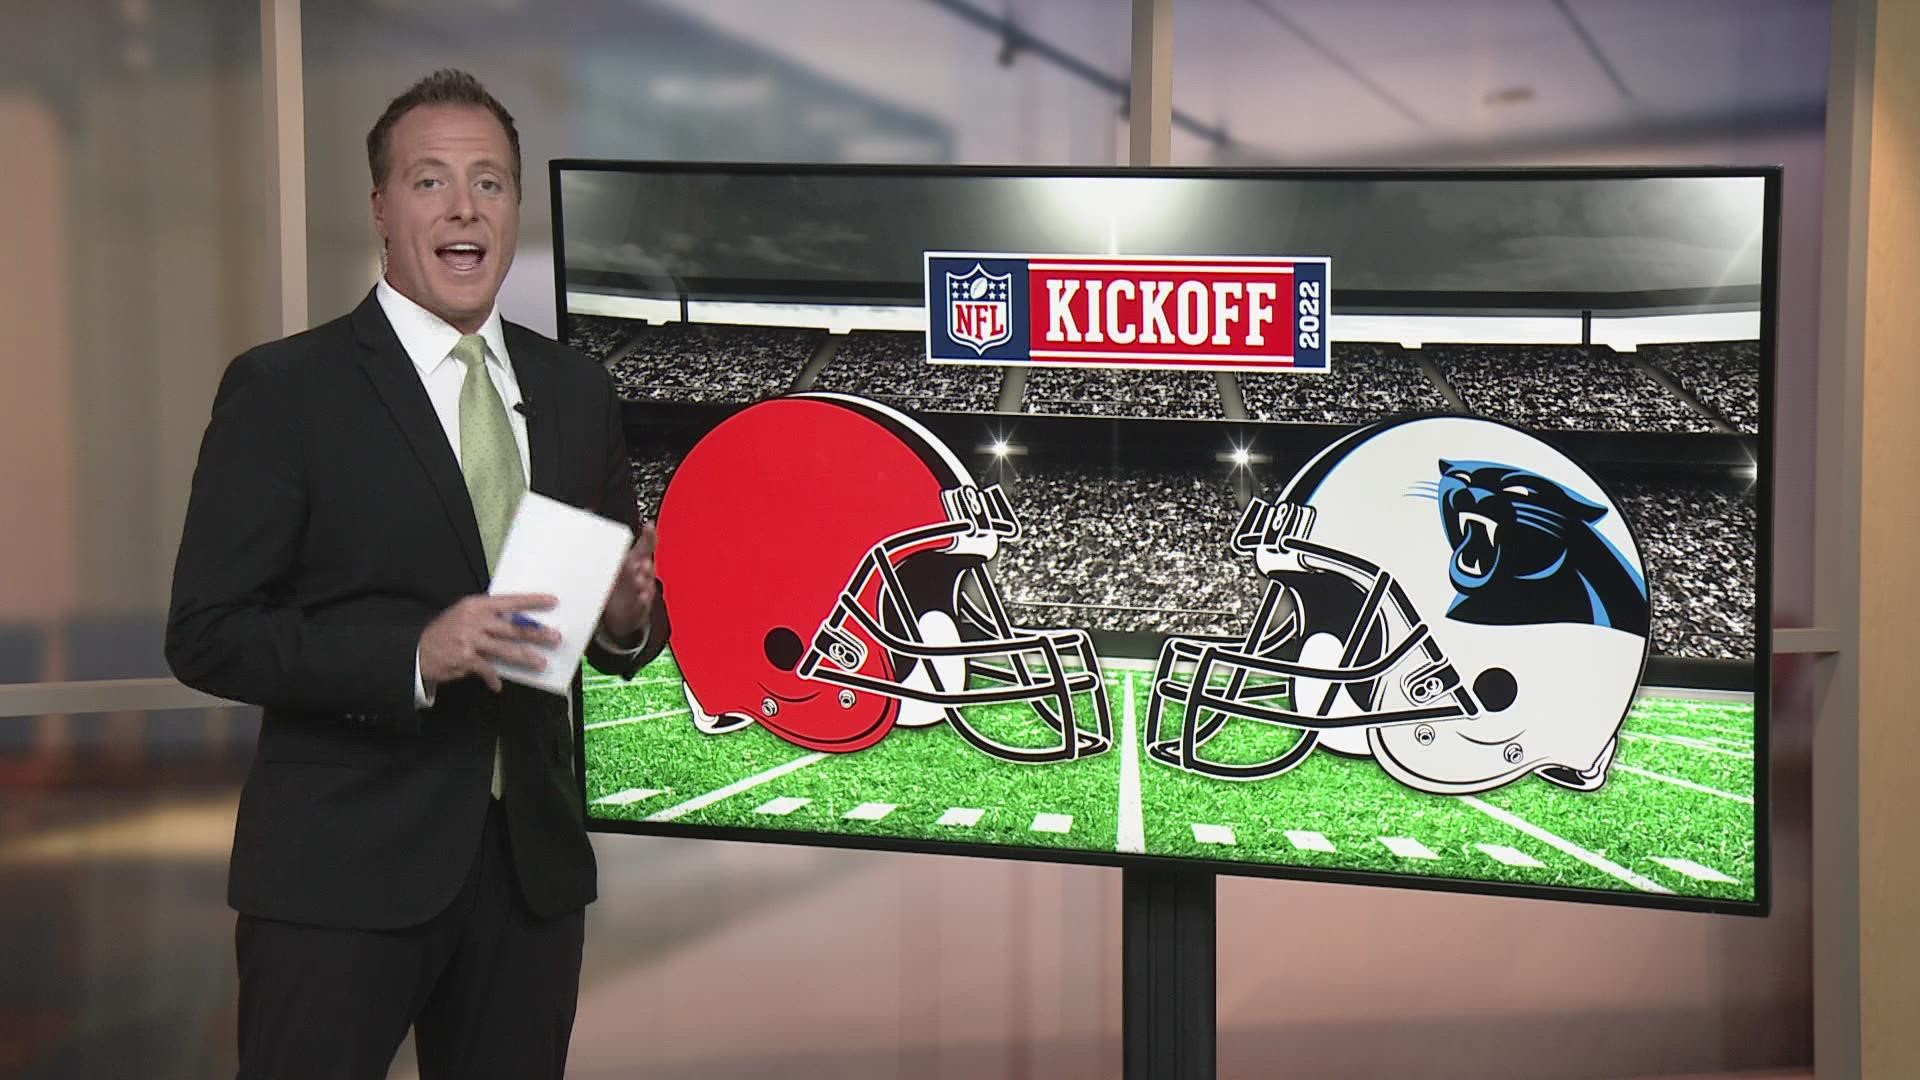 3News' Nick Camino gets you set for the Browns week 1 matchup in the 2022 NFL regular season